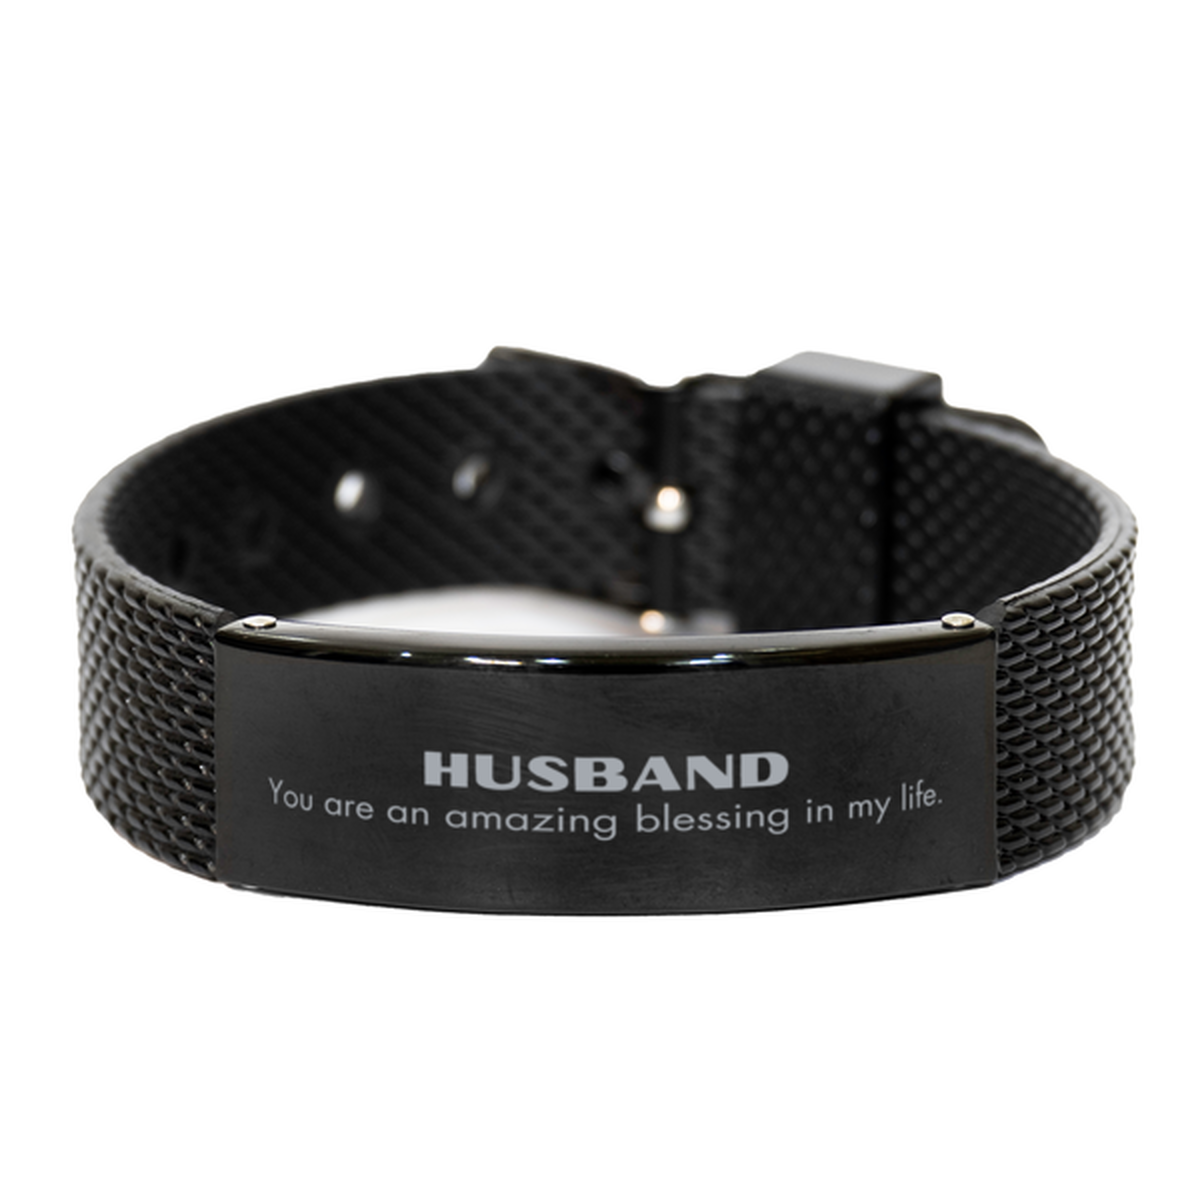 Husband Black Shark Mesh Bracelet, You are an amazing blessing in my life, Thank You Gifts For Husband, Inspirational Birthday Christmas Unique Gifts For Husband